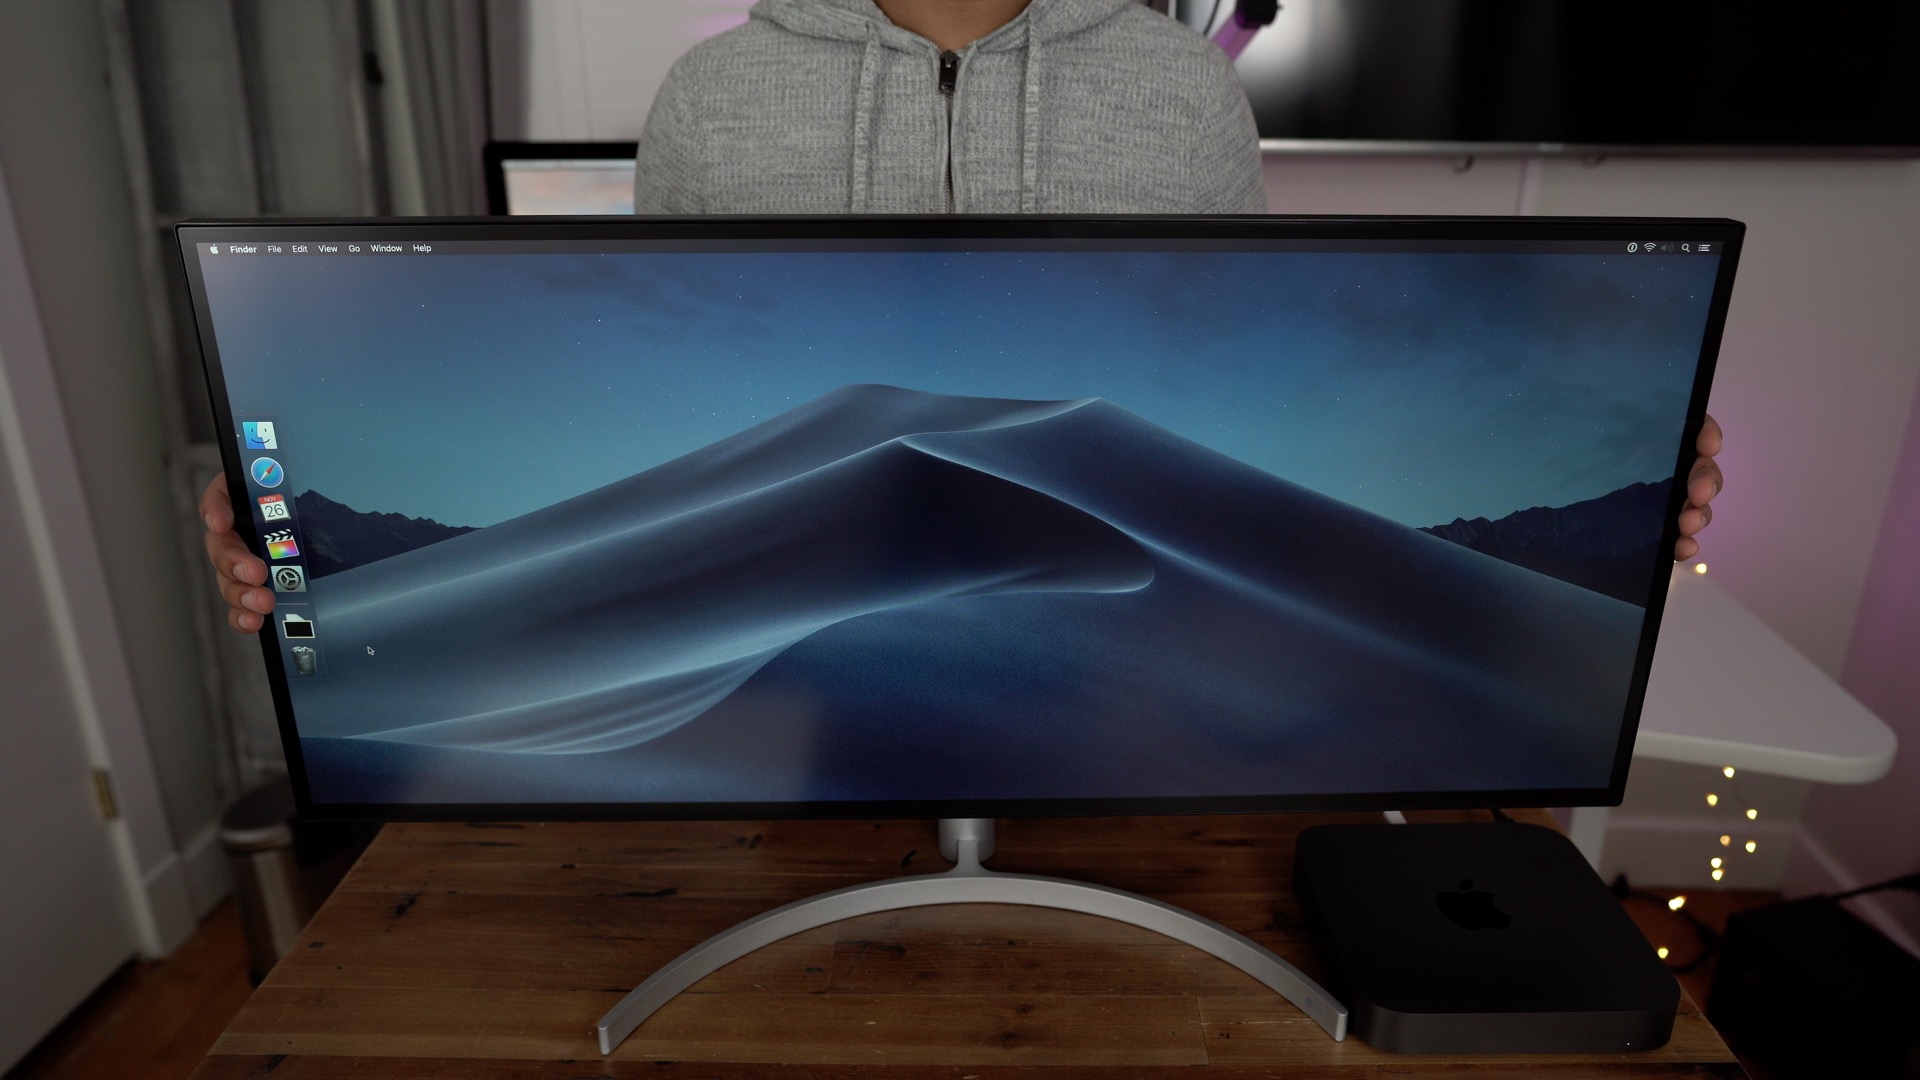 Review: 34-inch LG 5K2K UltraWide Thunderbolt 3 Display - 9to5Mac